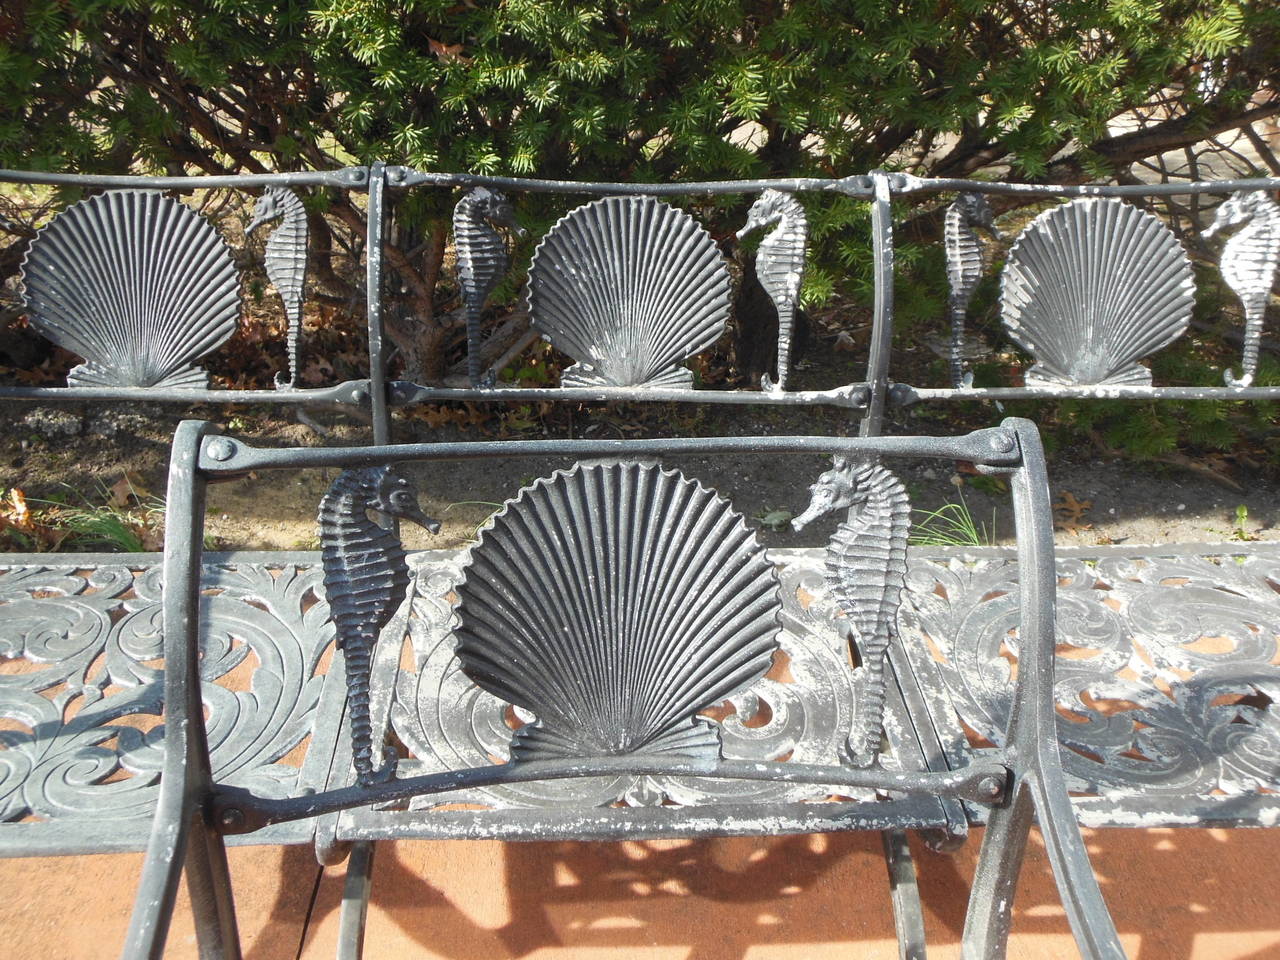 Hollywood Regency Patio Set by Molla for the Garden or Sea Shore with Shells and Sea Horse